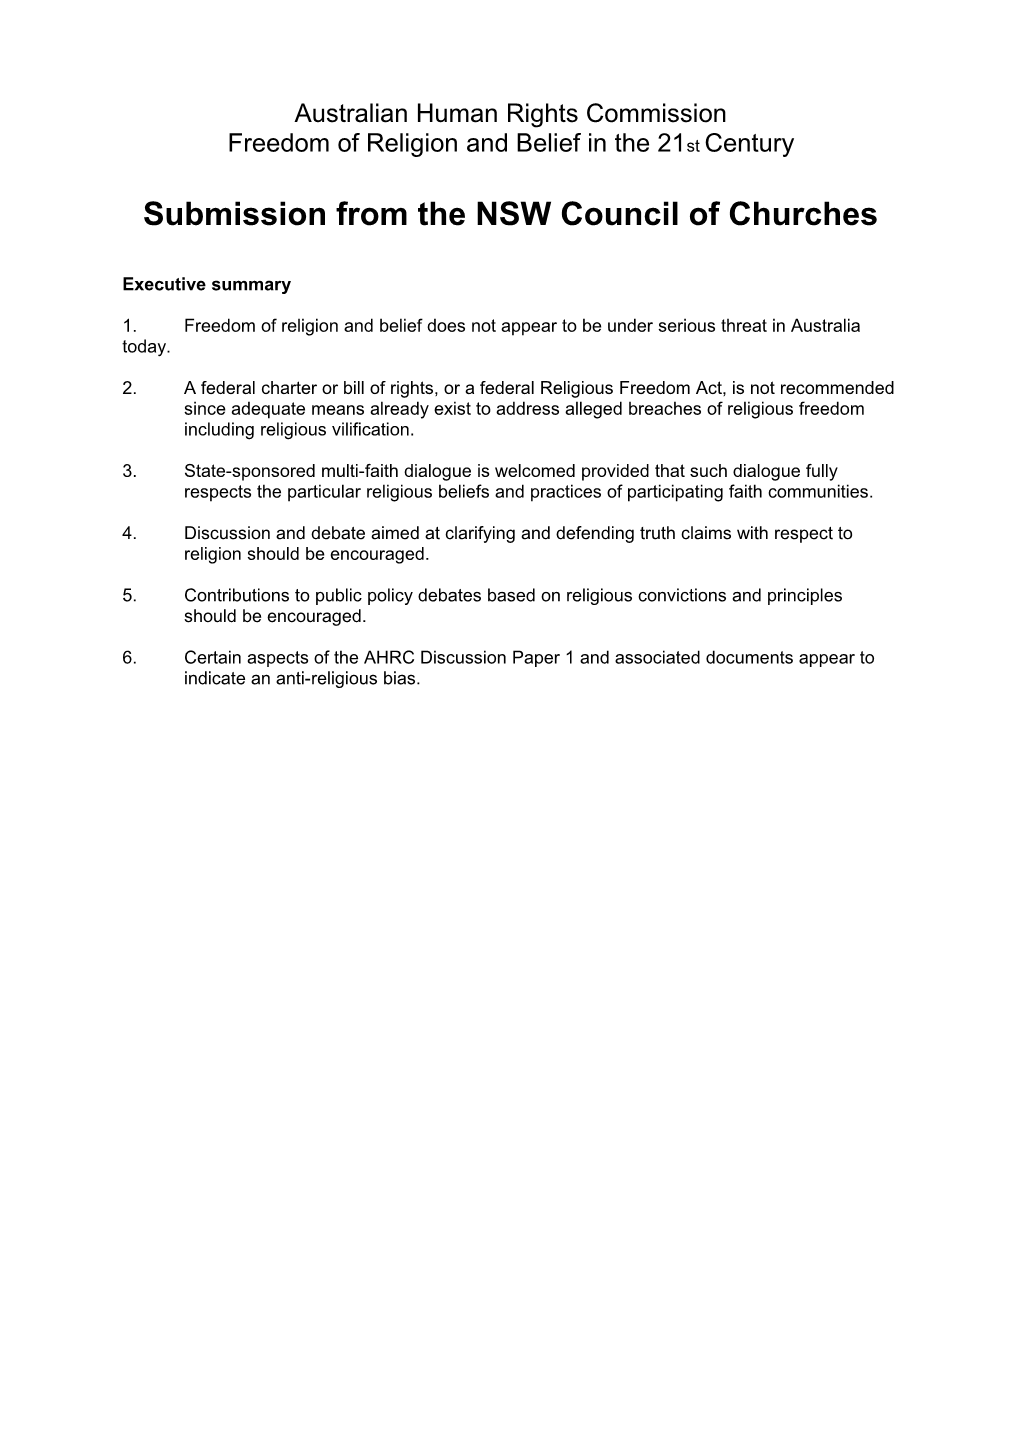 Submission from the NSW Council of Churches